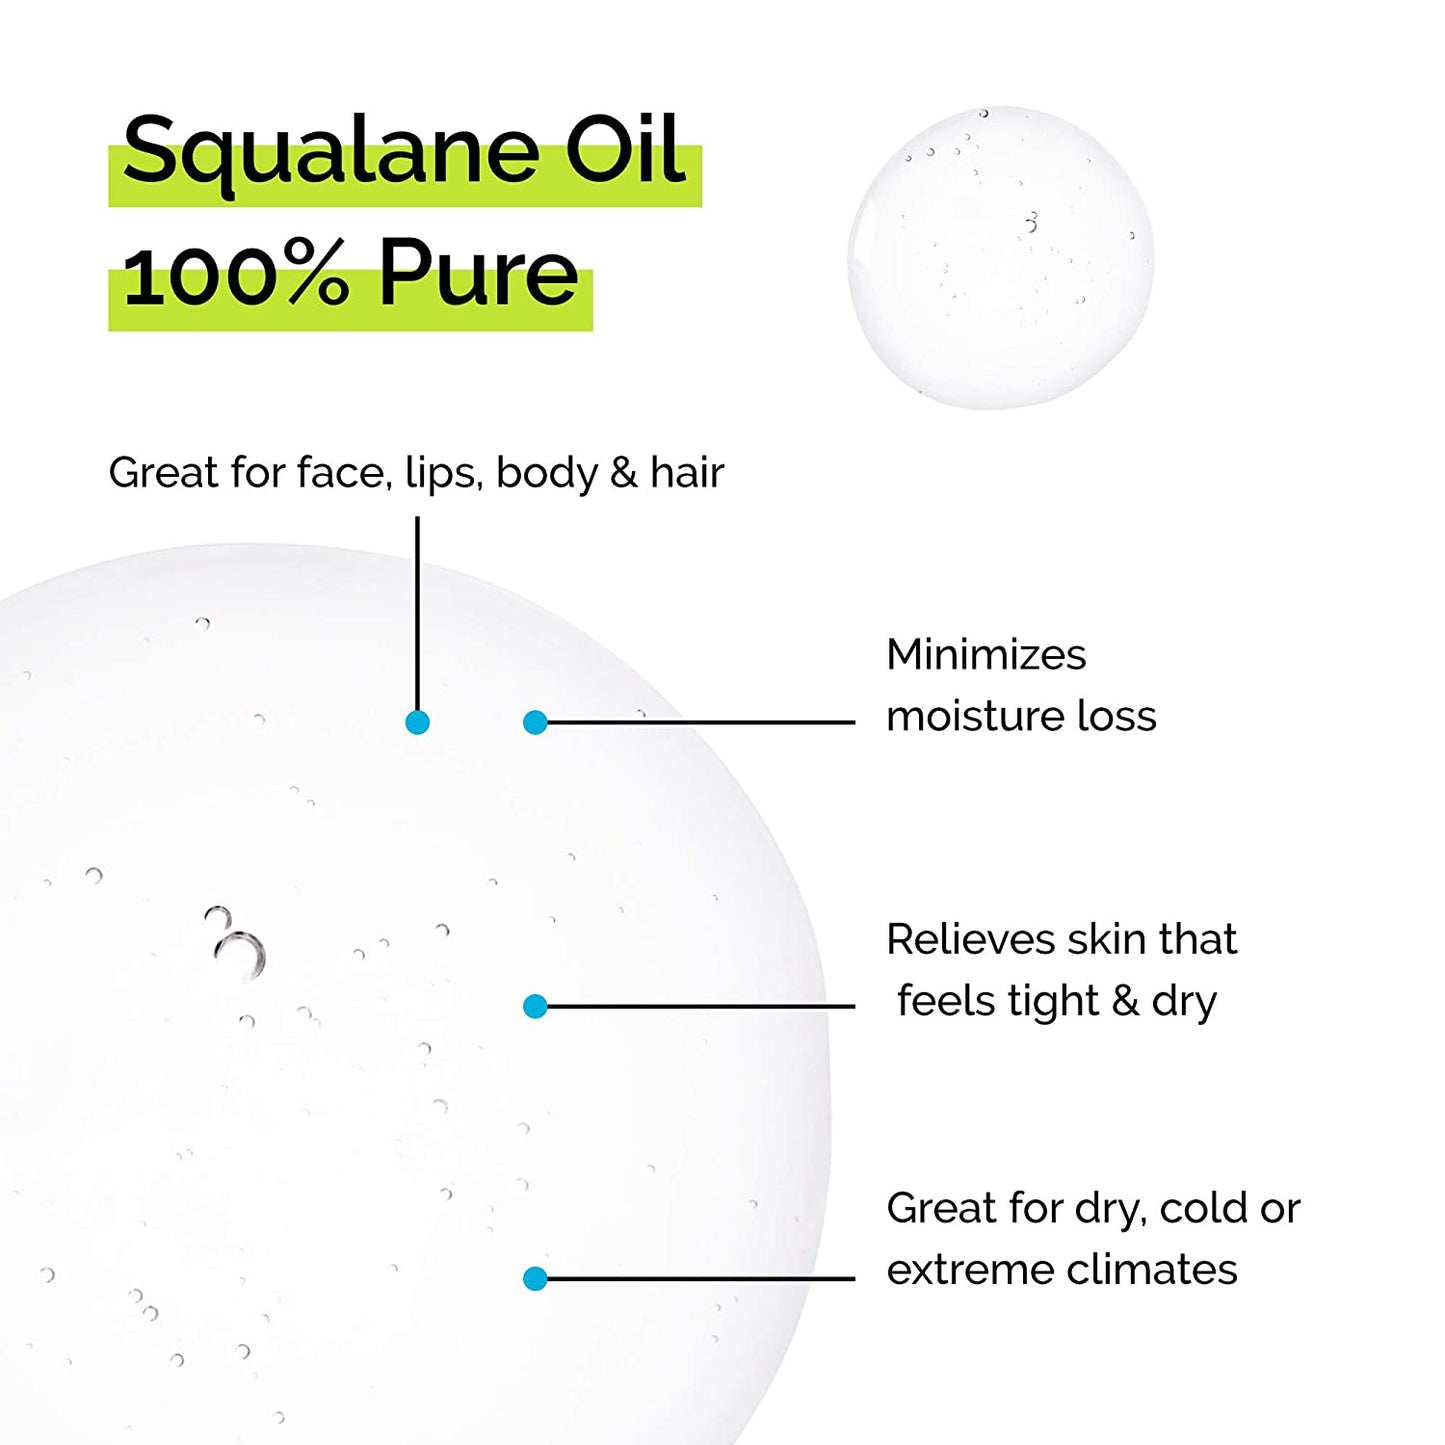 Timeless Skin Care Squalane Oil 100% Pure - 8 oz - Lightweight, Plant-Based Dry Oil - Improves Skin Elasticity & Radiance - Regulates Oil Production - All Skin Types, Including Acne-Prone Skin - (For 6 piece(s))